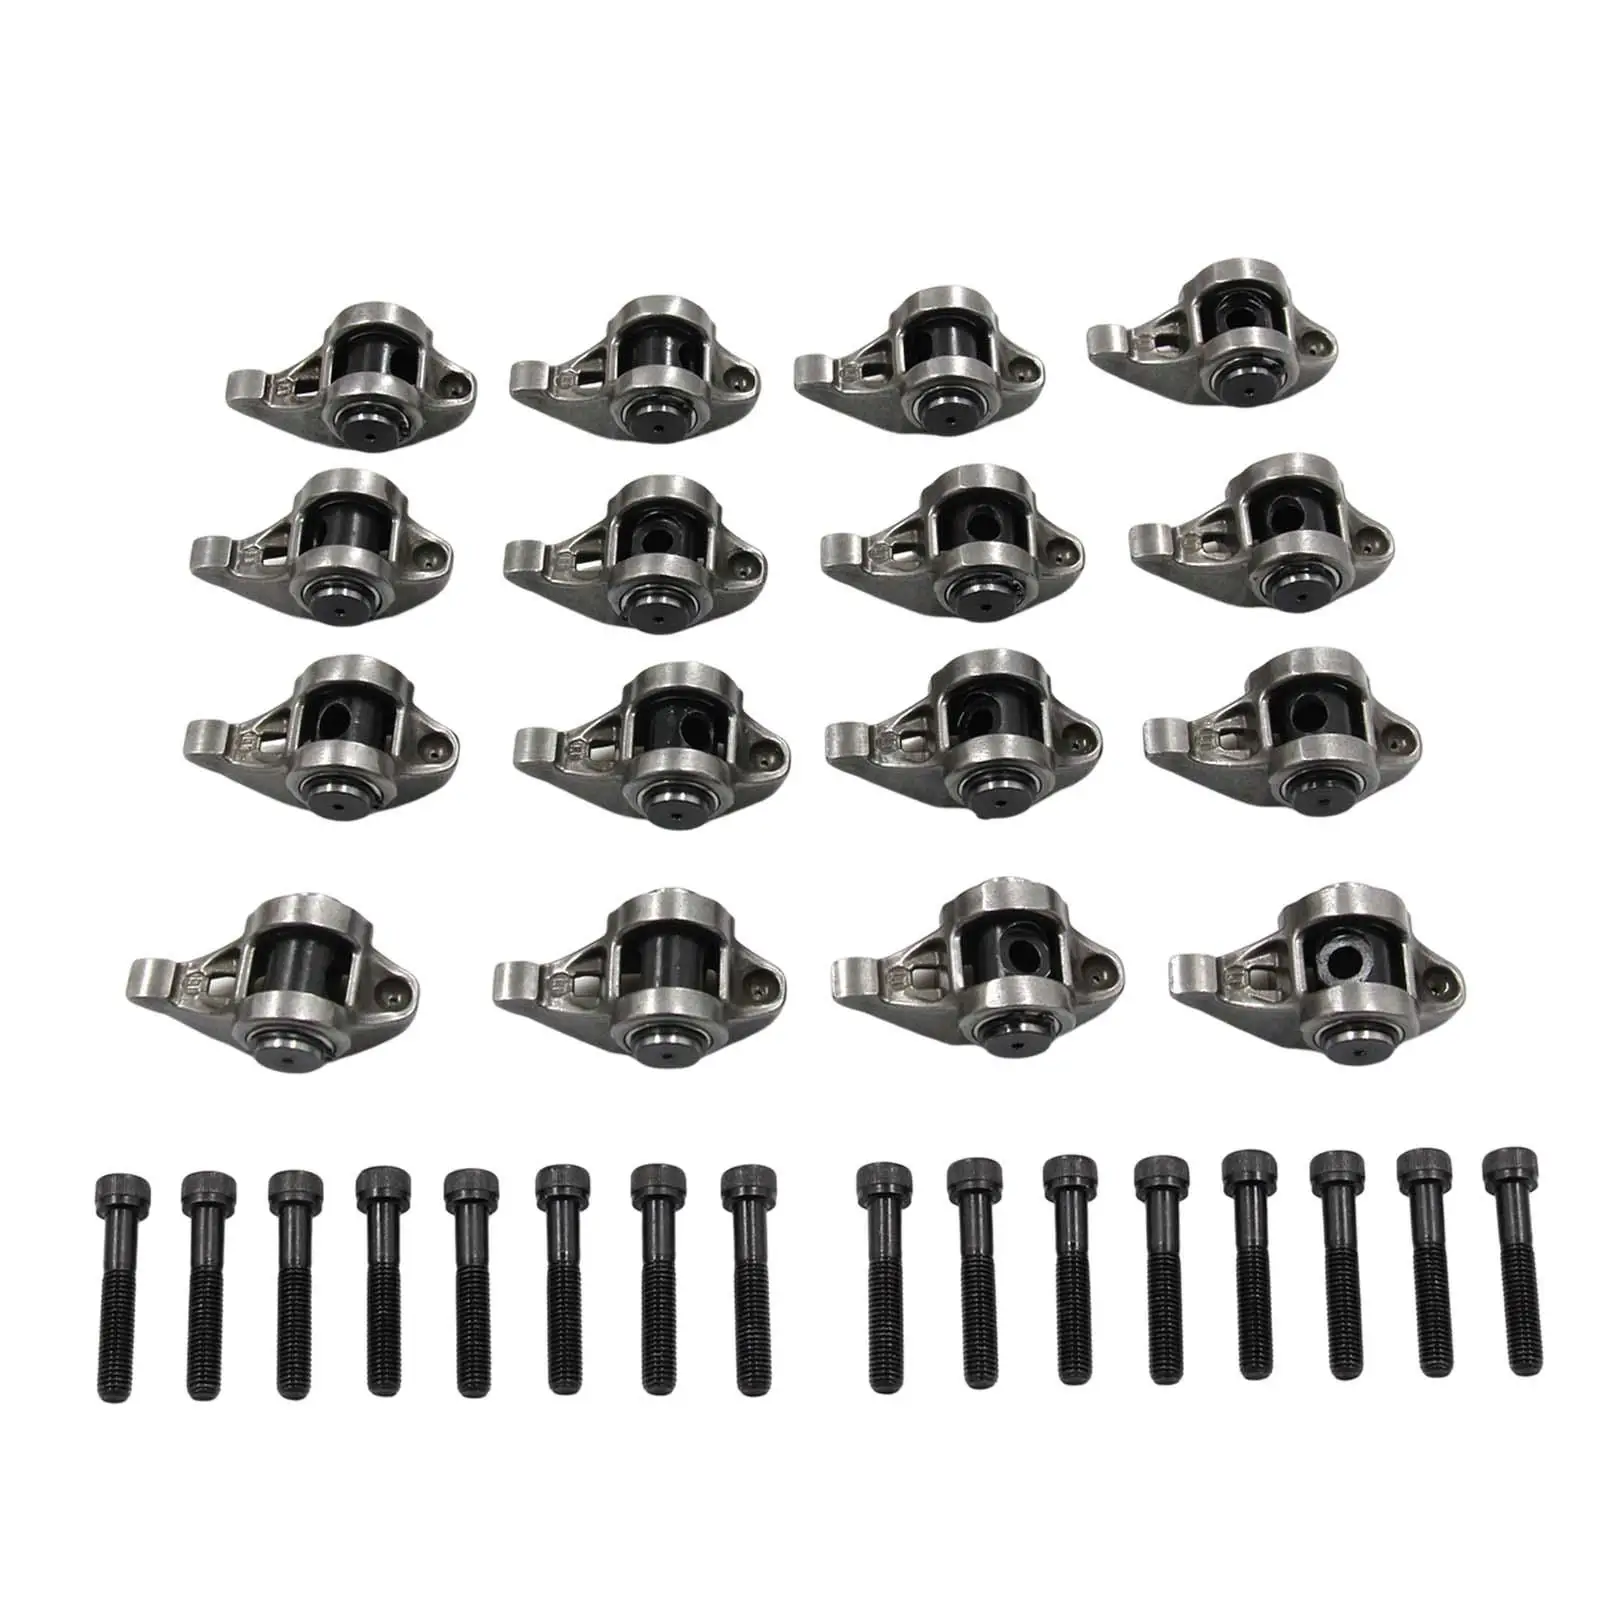 16 Pieces Rocker Arms and Bolts with Trunion Kit 10214664 Replace Parts Steel for Chevrolet LS1 LS2 LS3 LS6 Lq4 Lq9 LM7 LM4